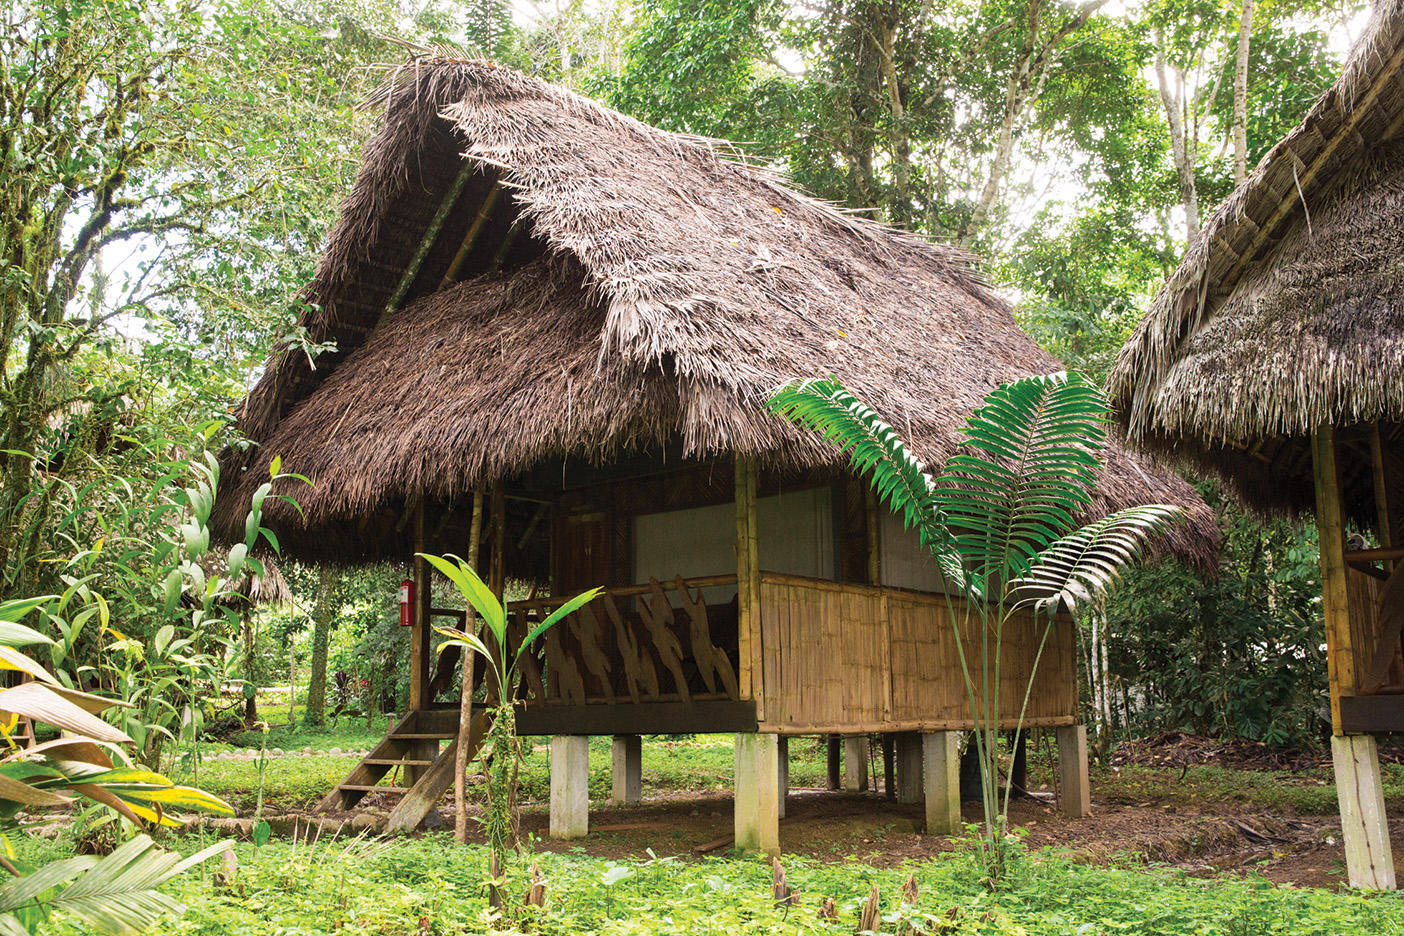 A thatched-roof hut on stilts that is part of the school compound